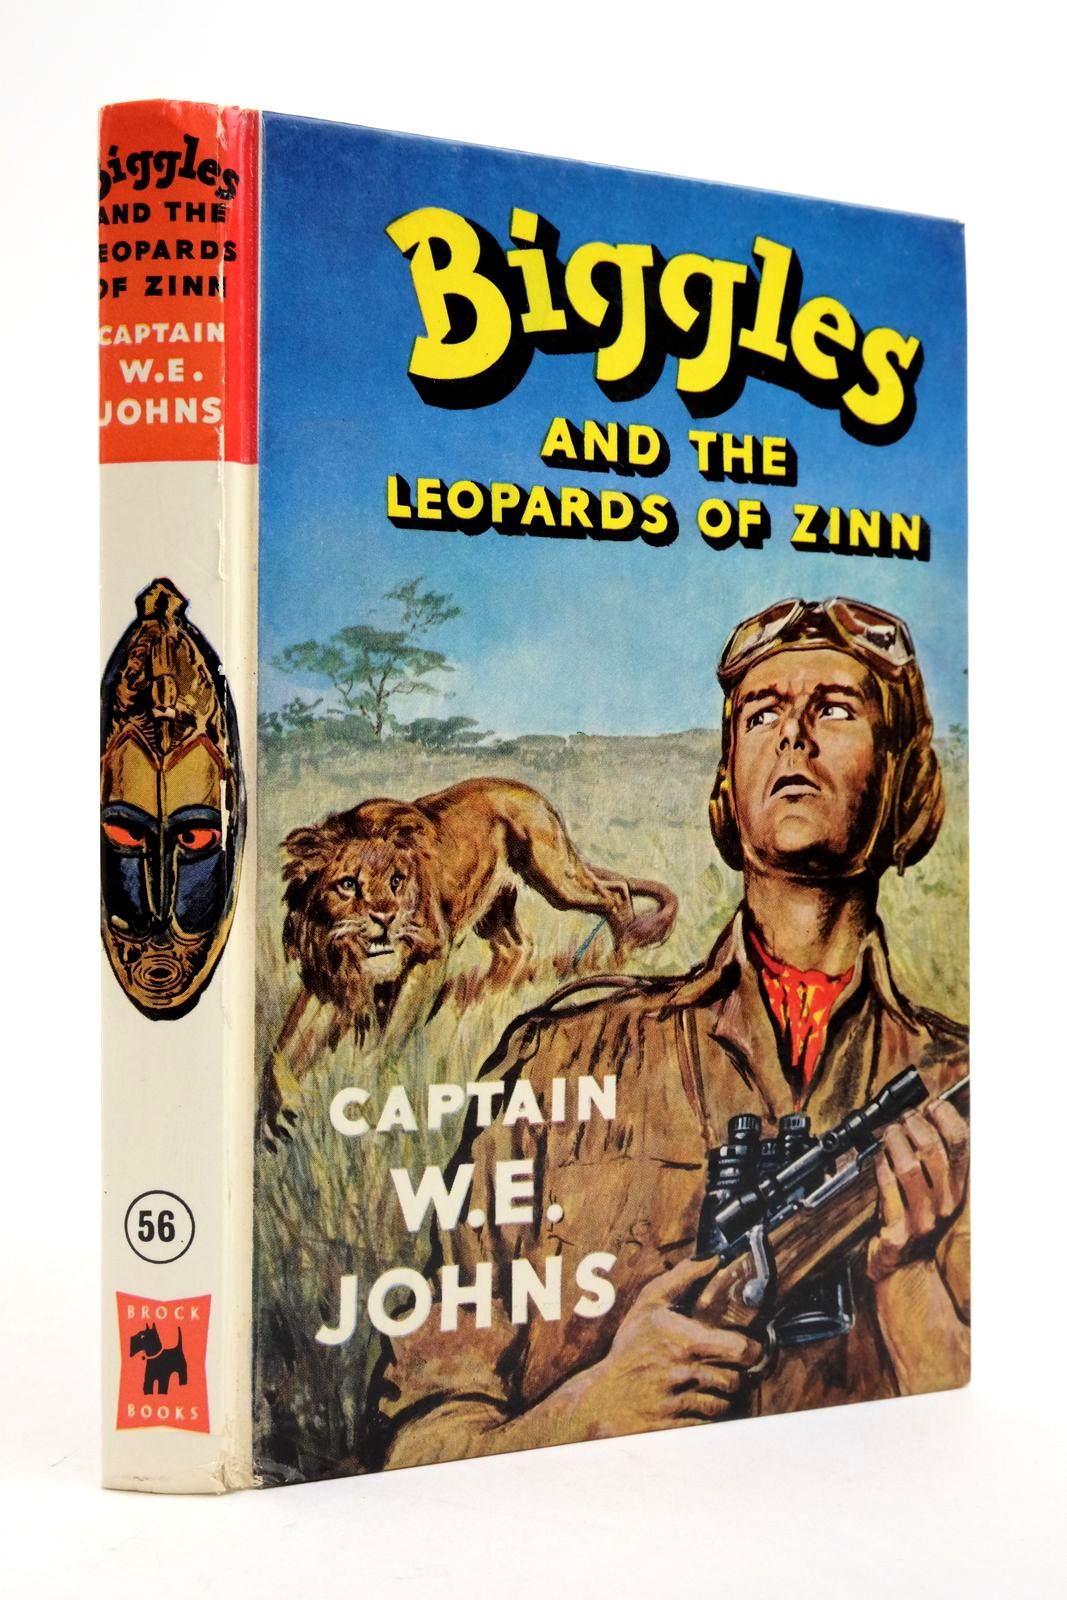 Photo of BIGGLES AND THE LEOPARDS OF ZINN written by Johns, W.E. published by Brockhampton Press (STOCK CODE: 2138785)  for sale by Stella & Rose's Books